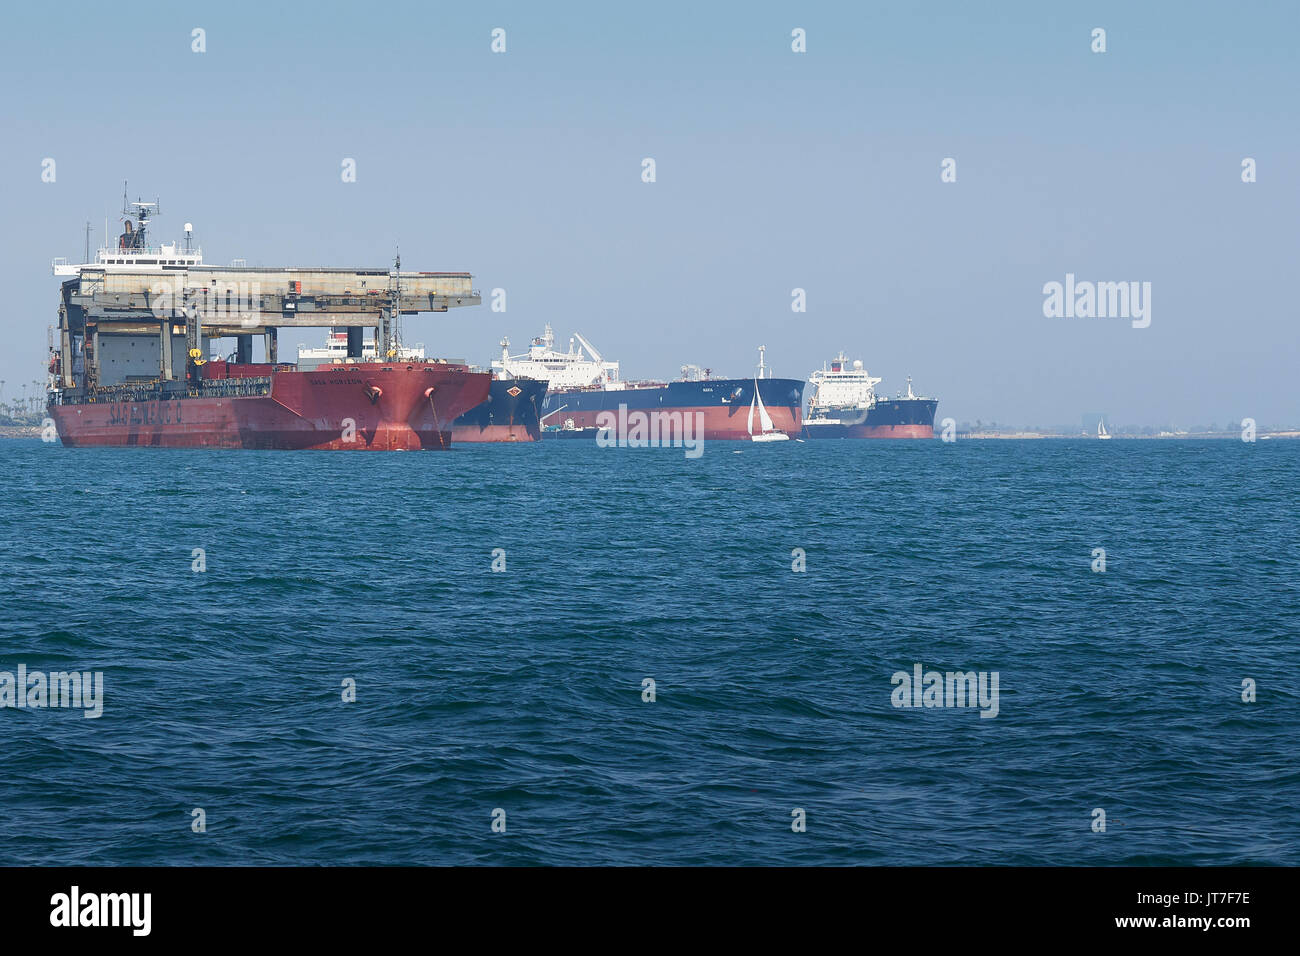 Specialist Open-Hatch Gantry Vessel, SAGA Horizon, With Other Cargo Ships, Anchored In The Port of Long Beach, California. Stock Photo